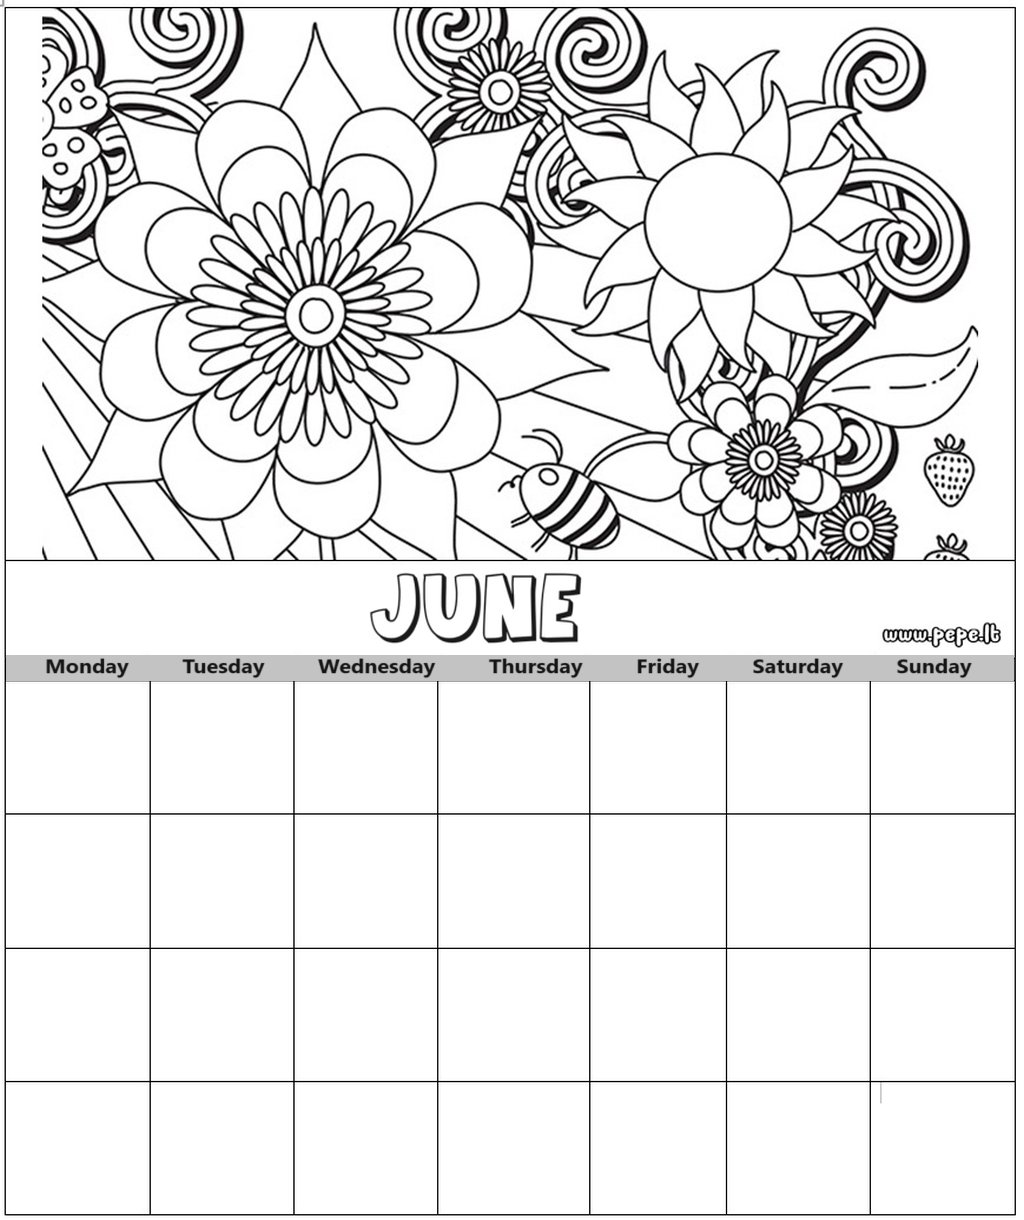 June calendar for coloring and printing